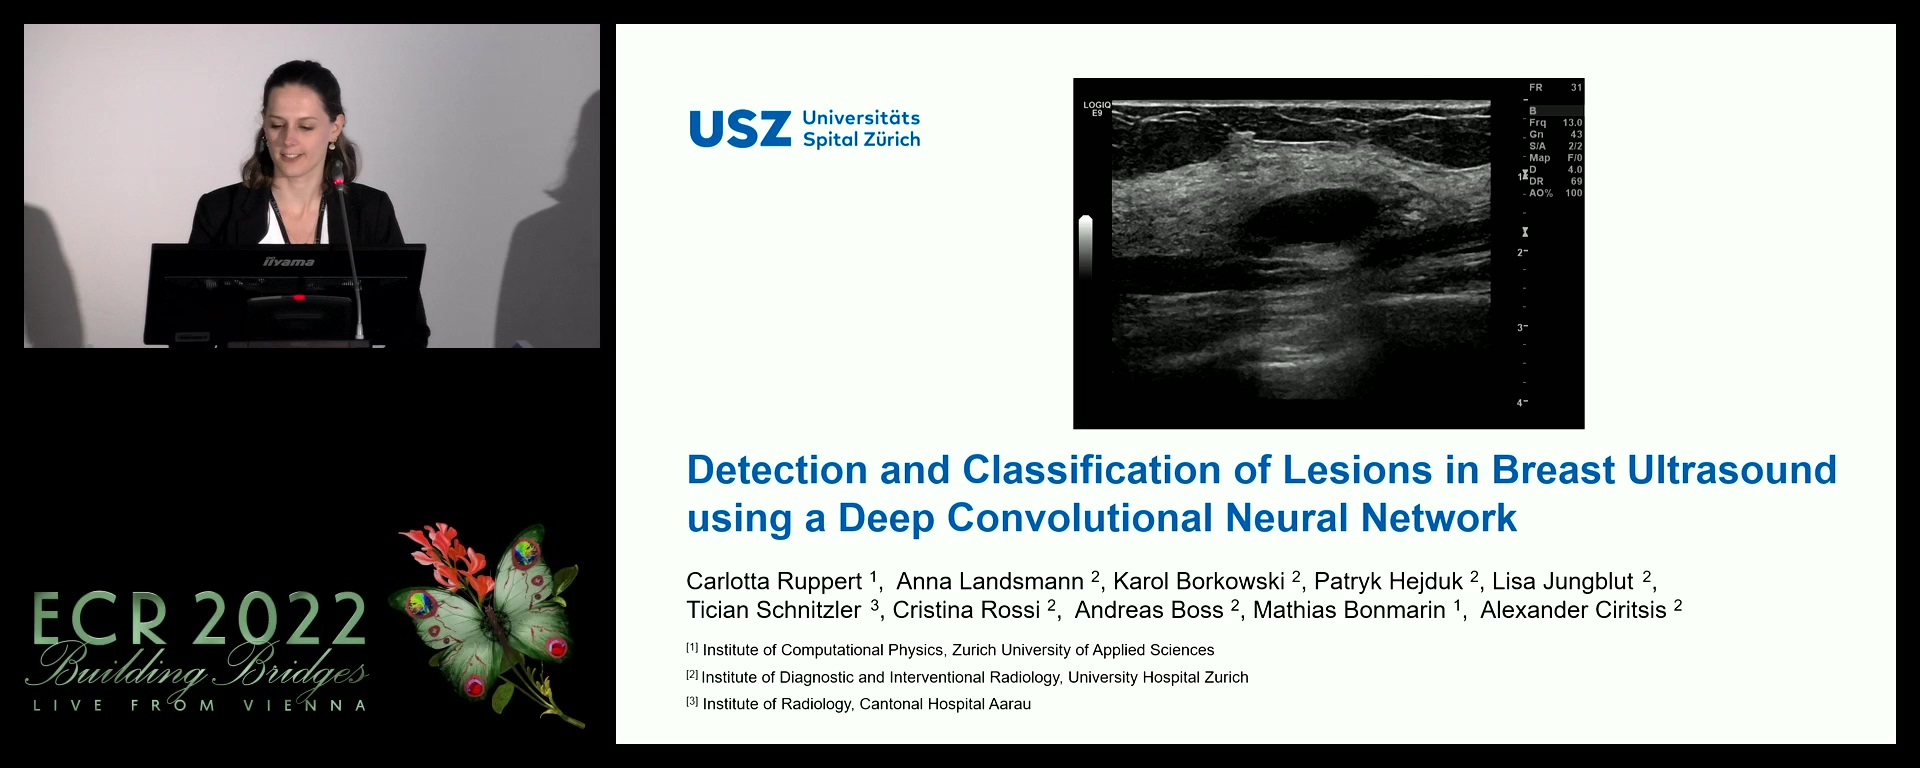 Detection and classification of lesions in breast ultrasound using a deep convolutional neural network